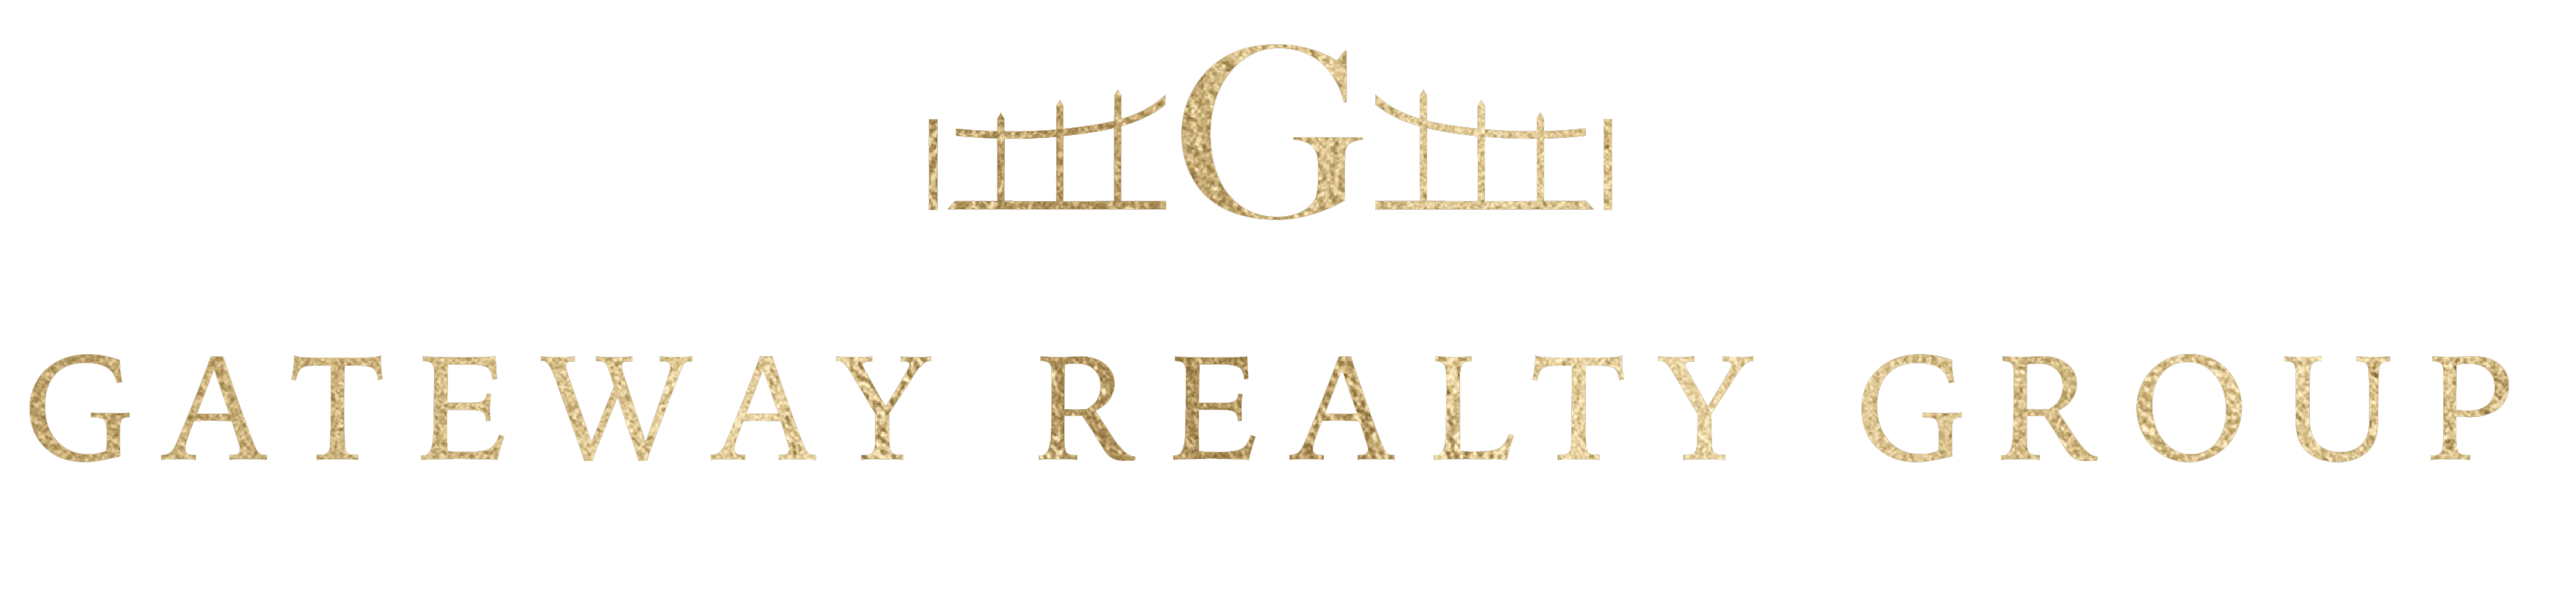 Gateway Realty Logo With Text